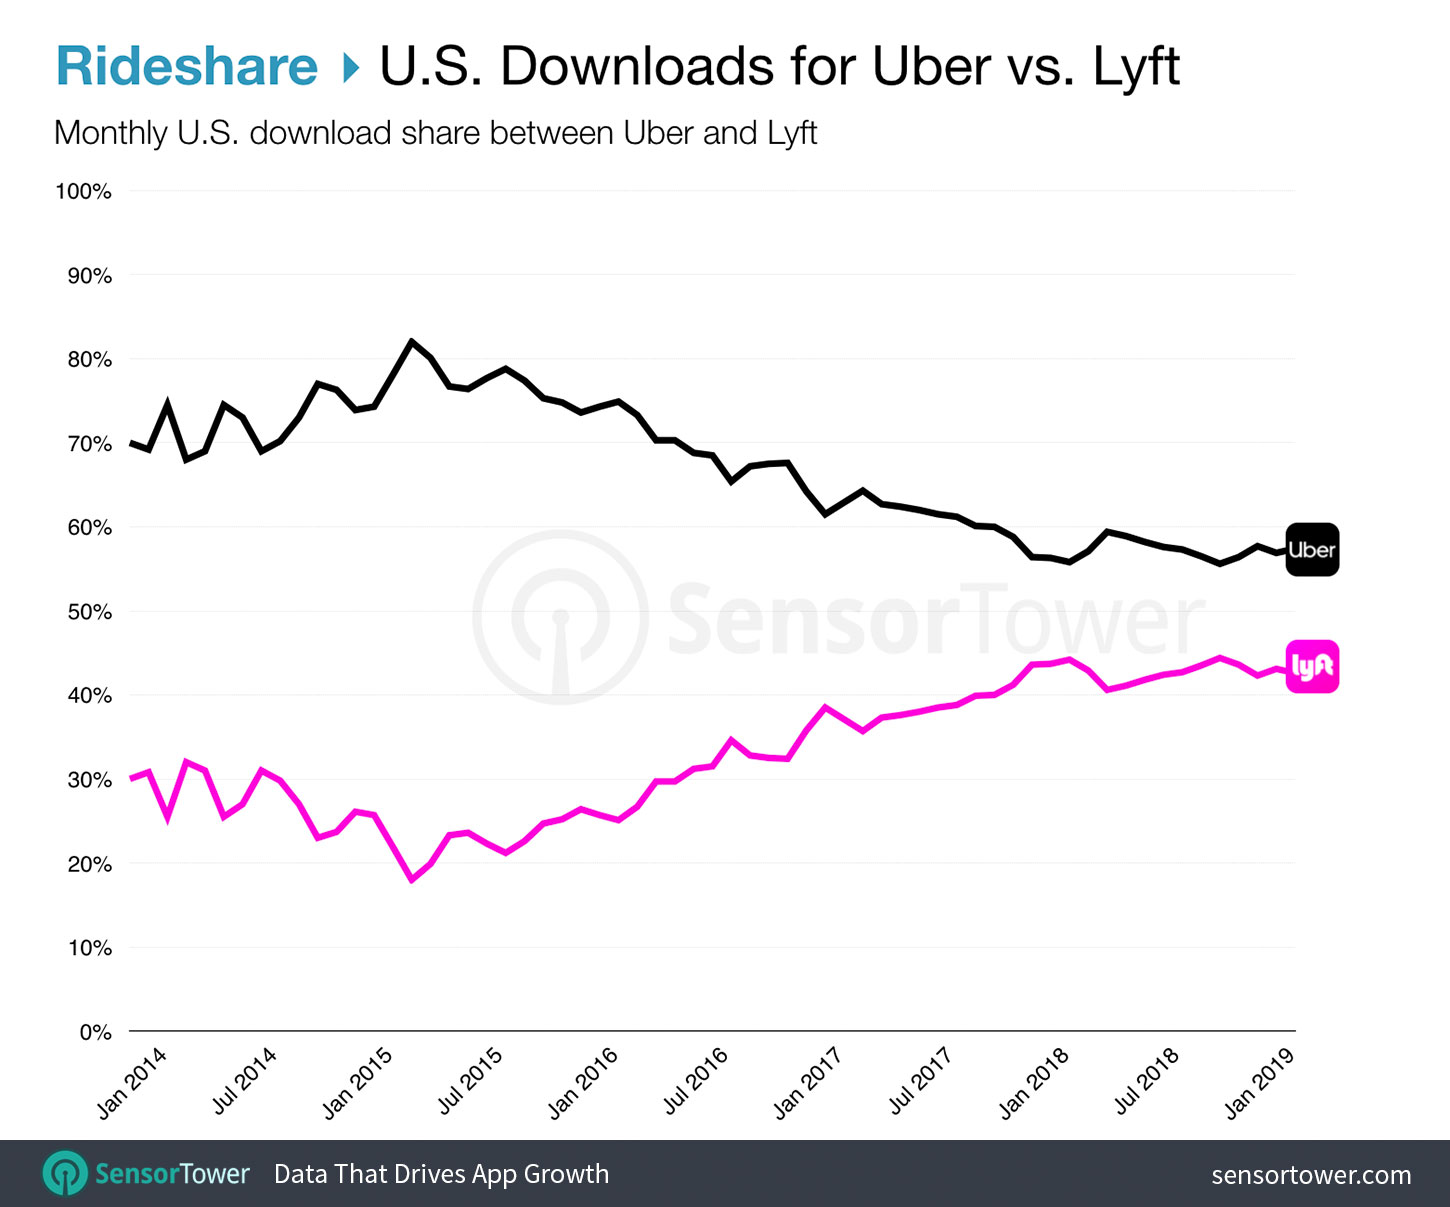 U.S. Downloads for Uber and Lyft during Q1 2019